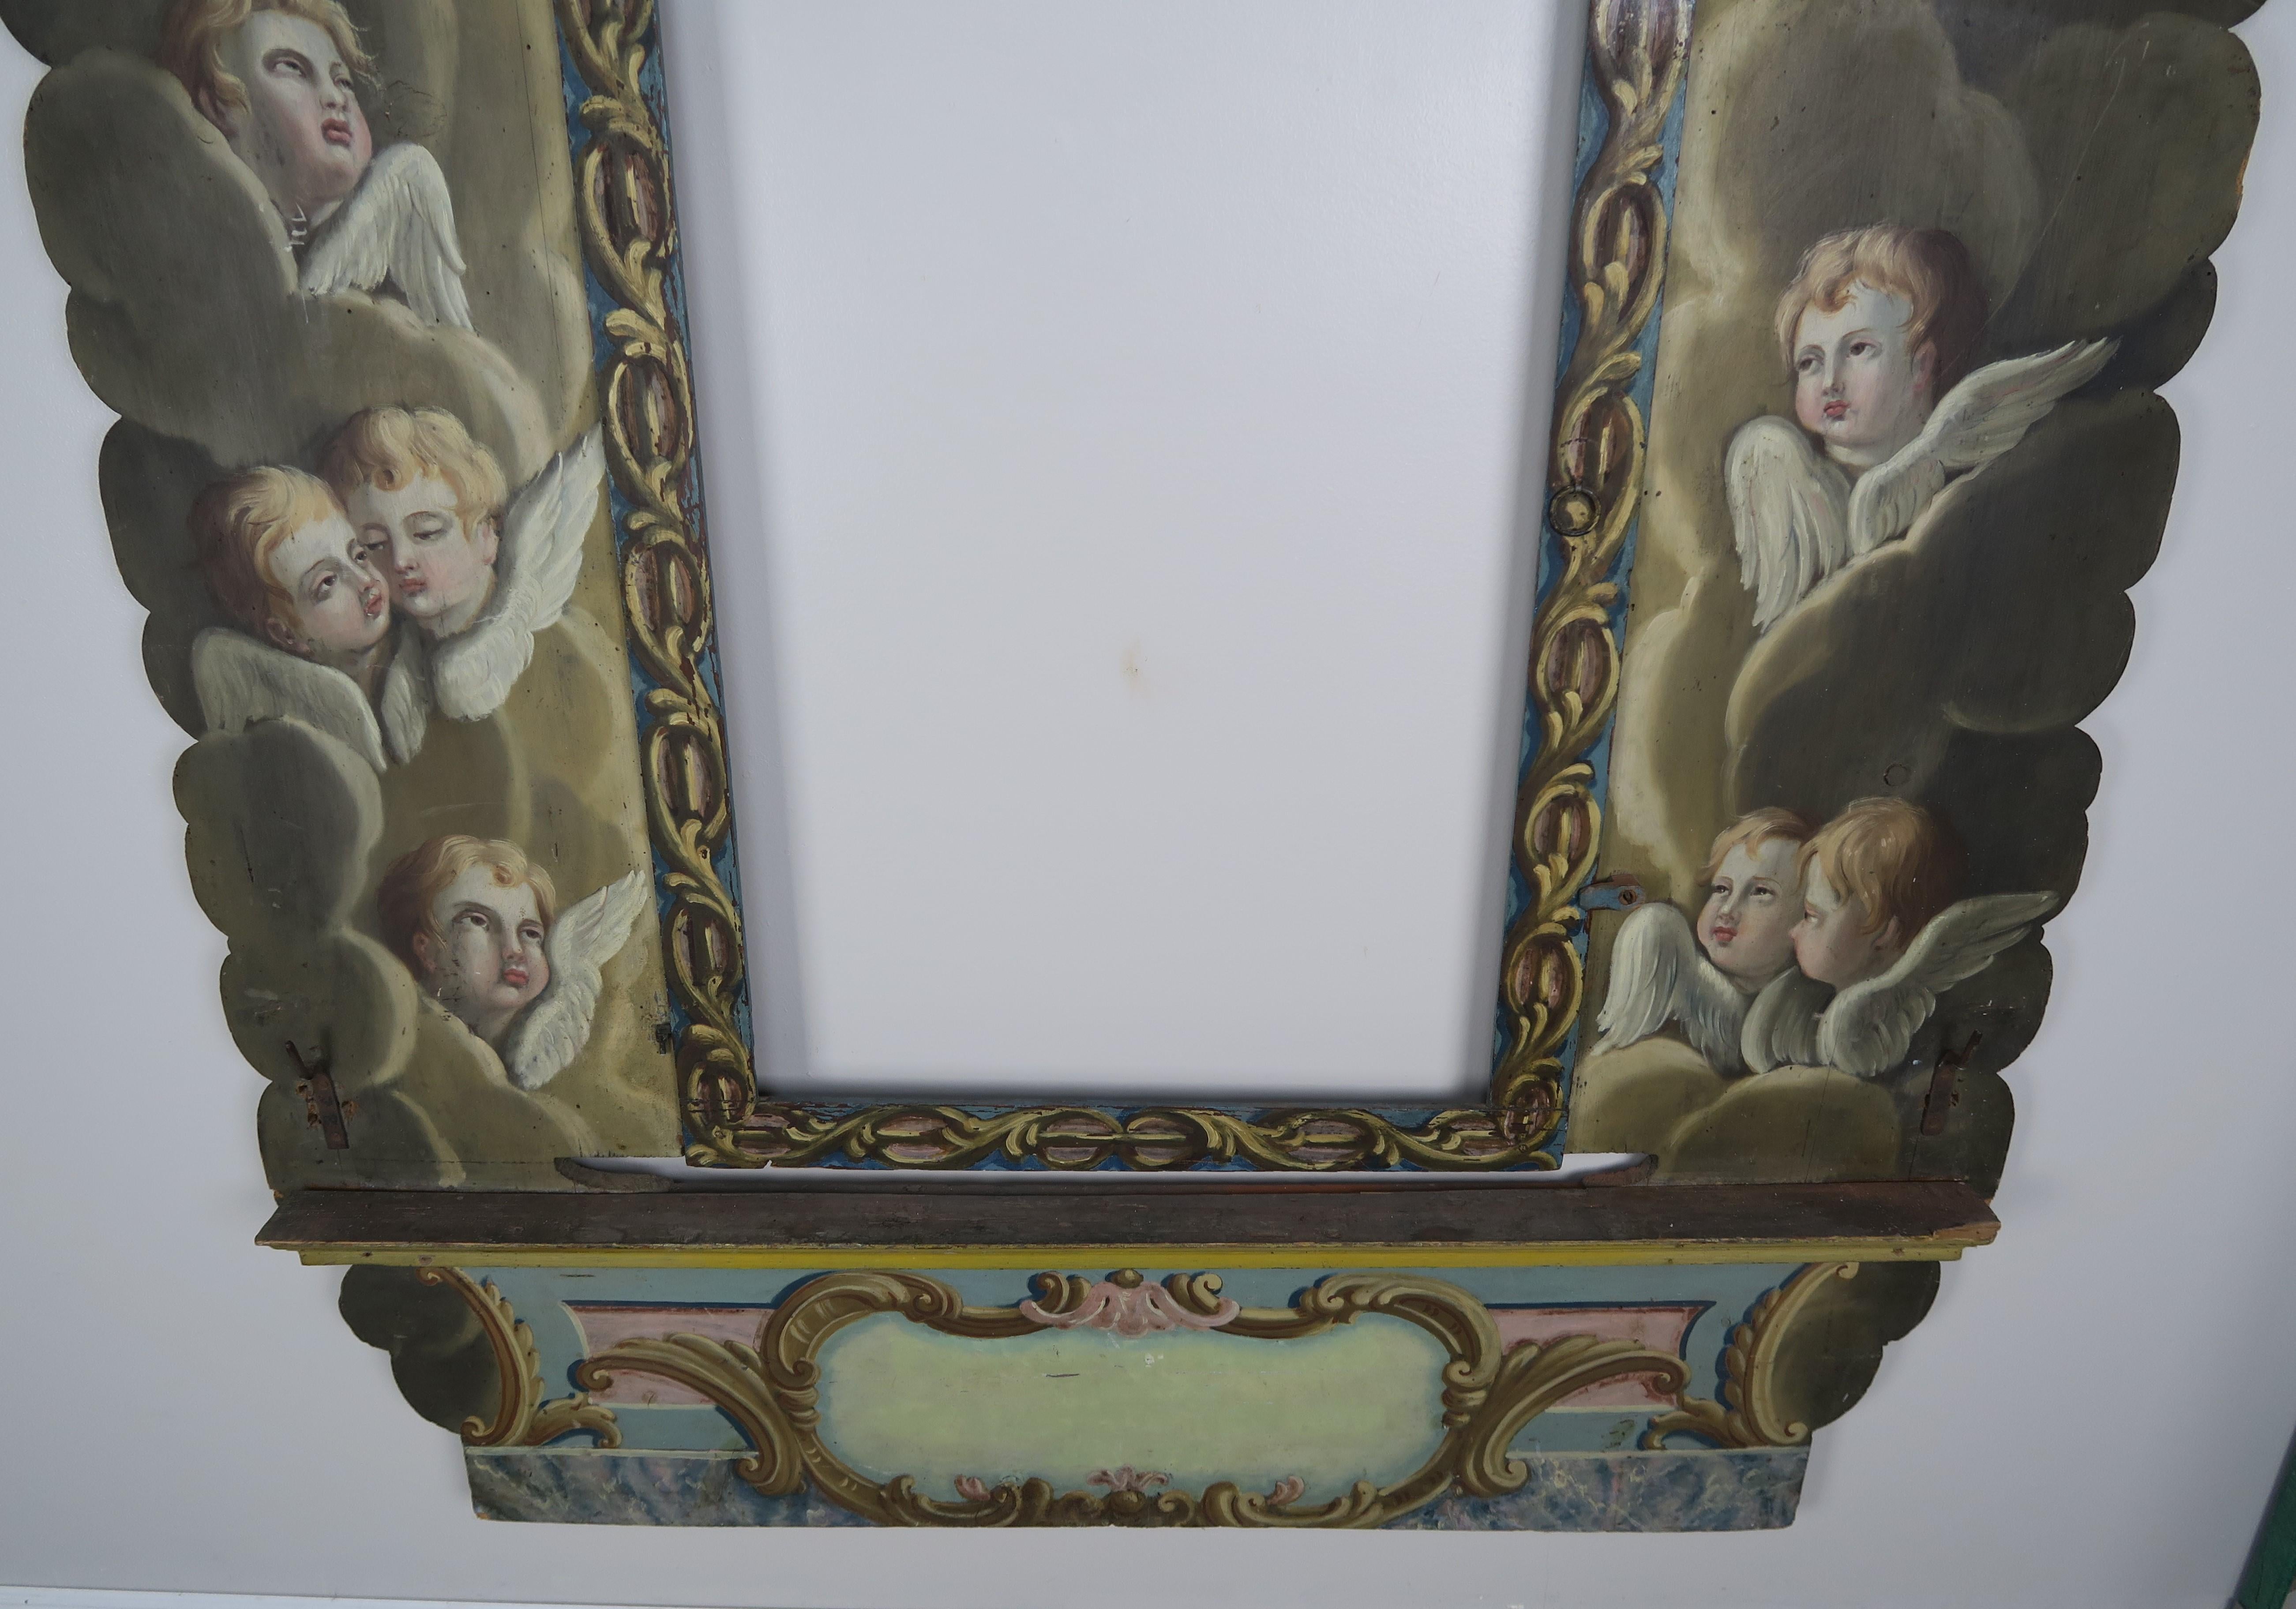 Hand-Painted 19th Century Italian Painted Frame with Cherubs